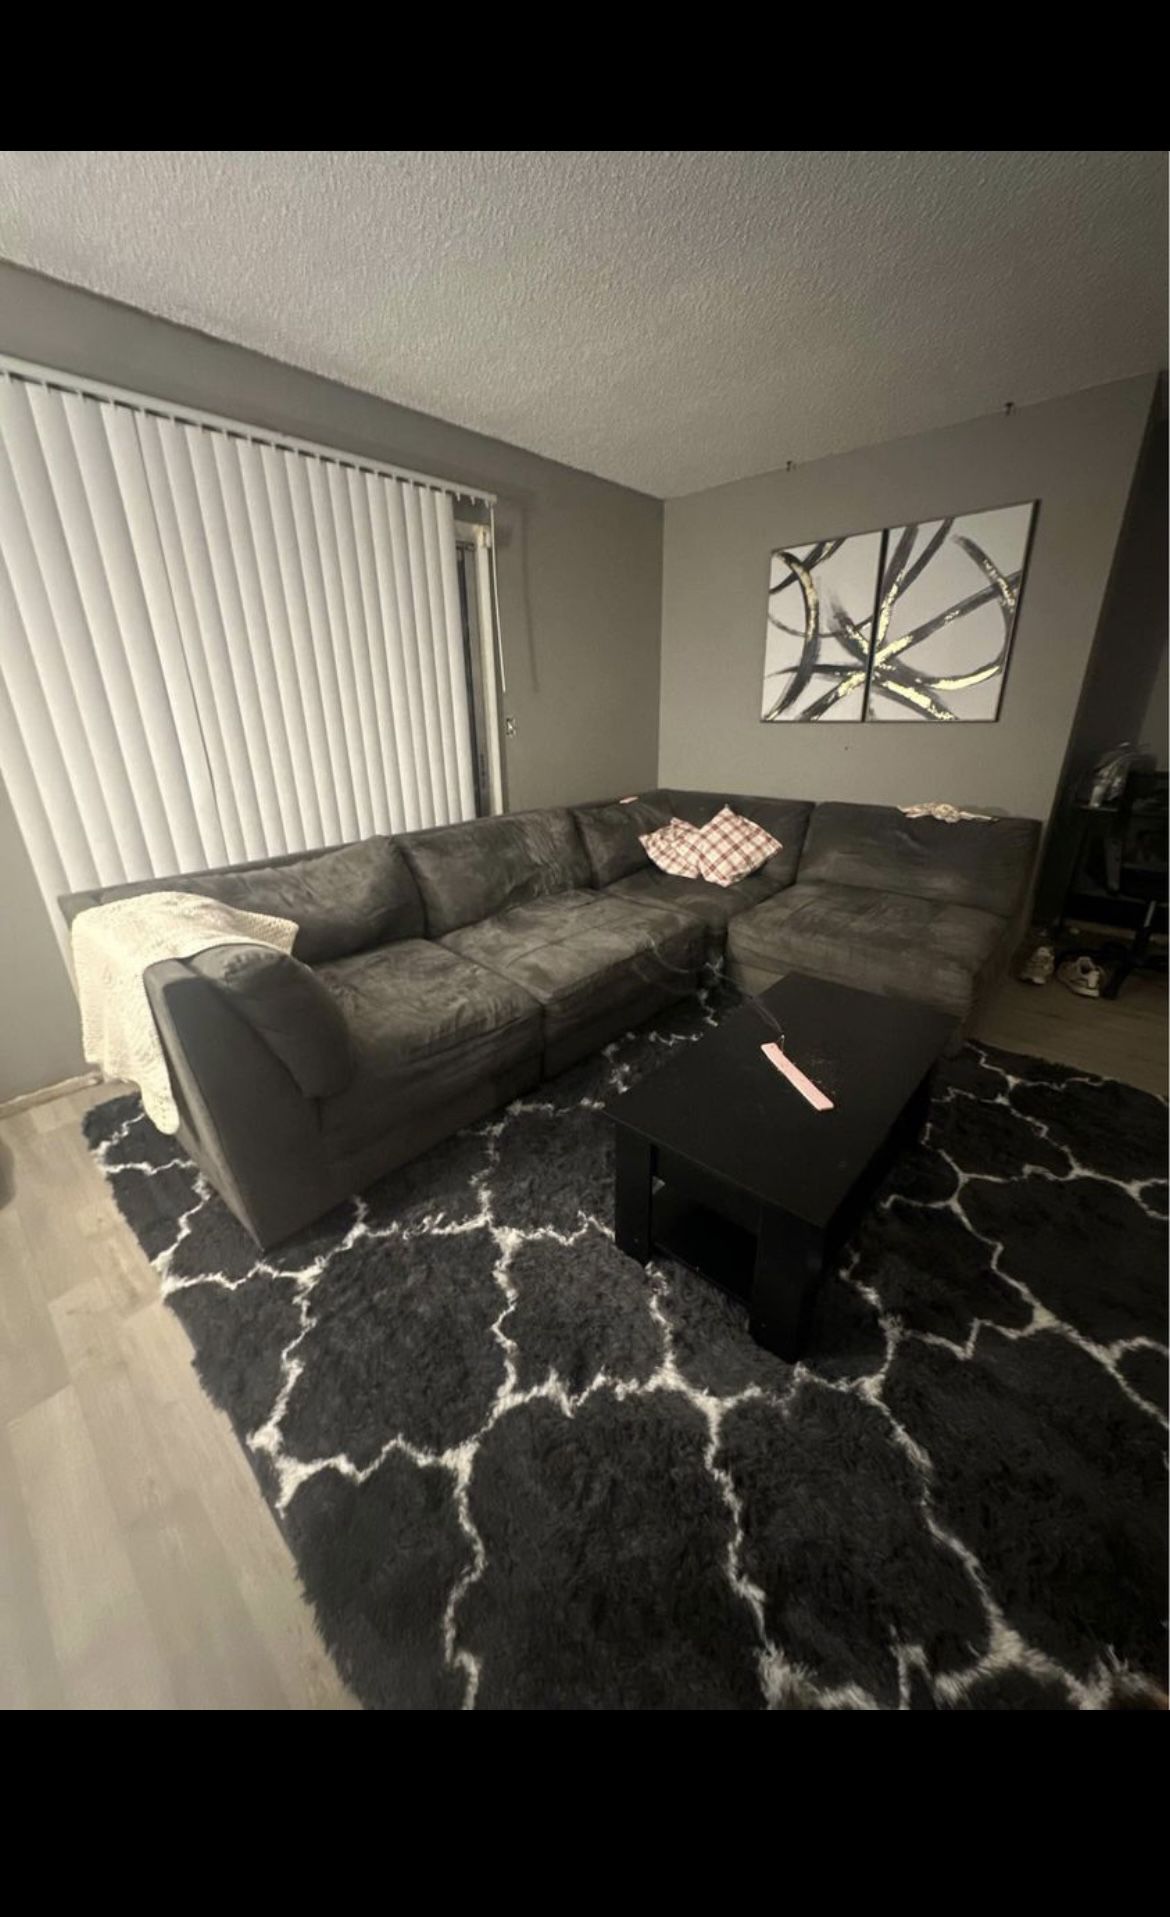 Grey sectional couch